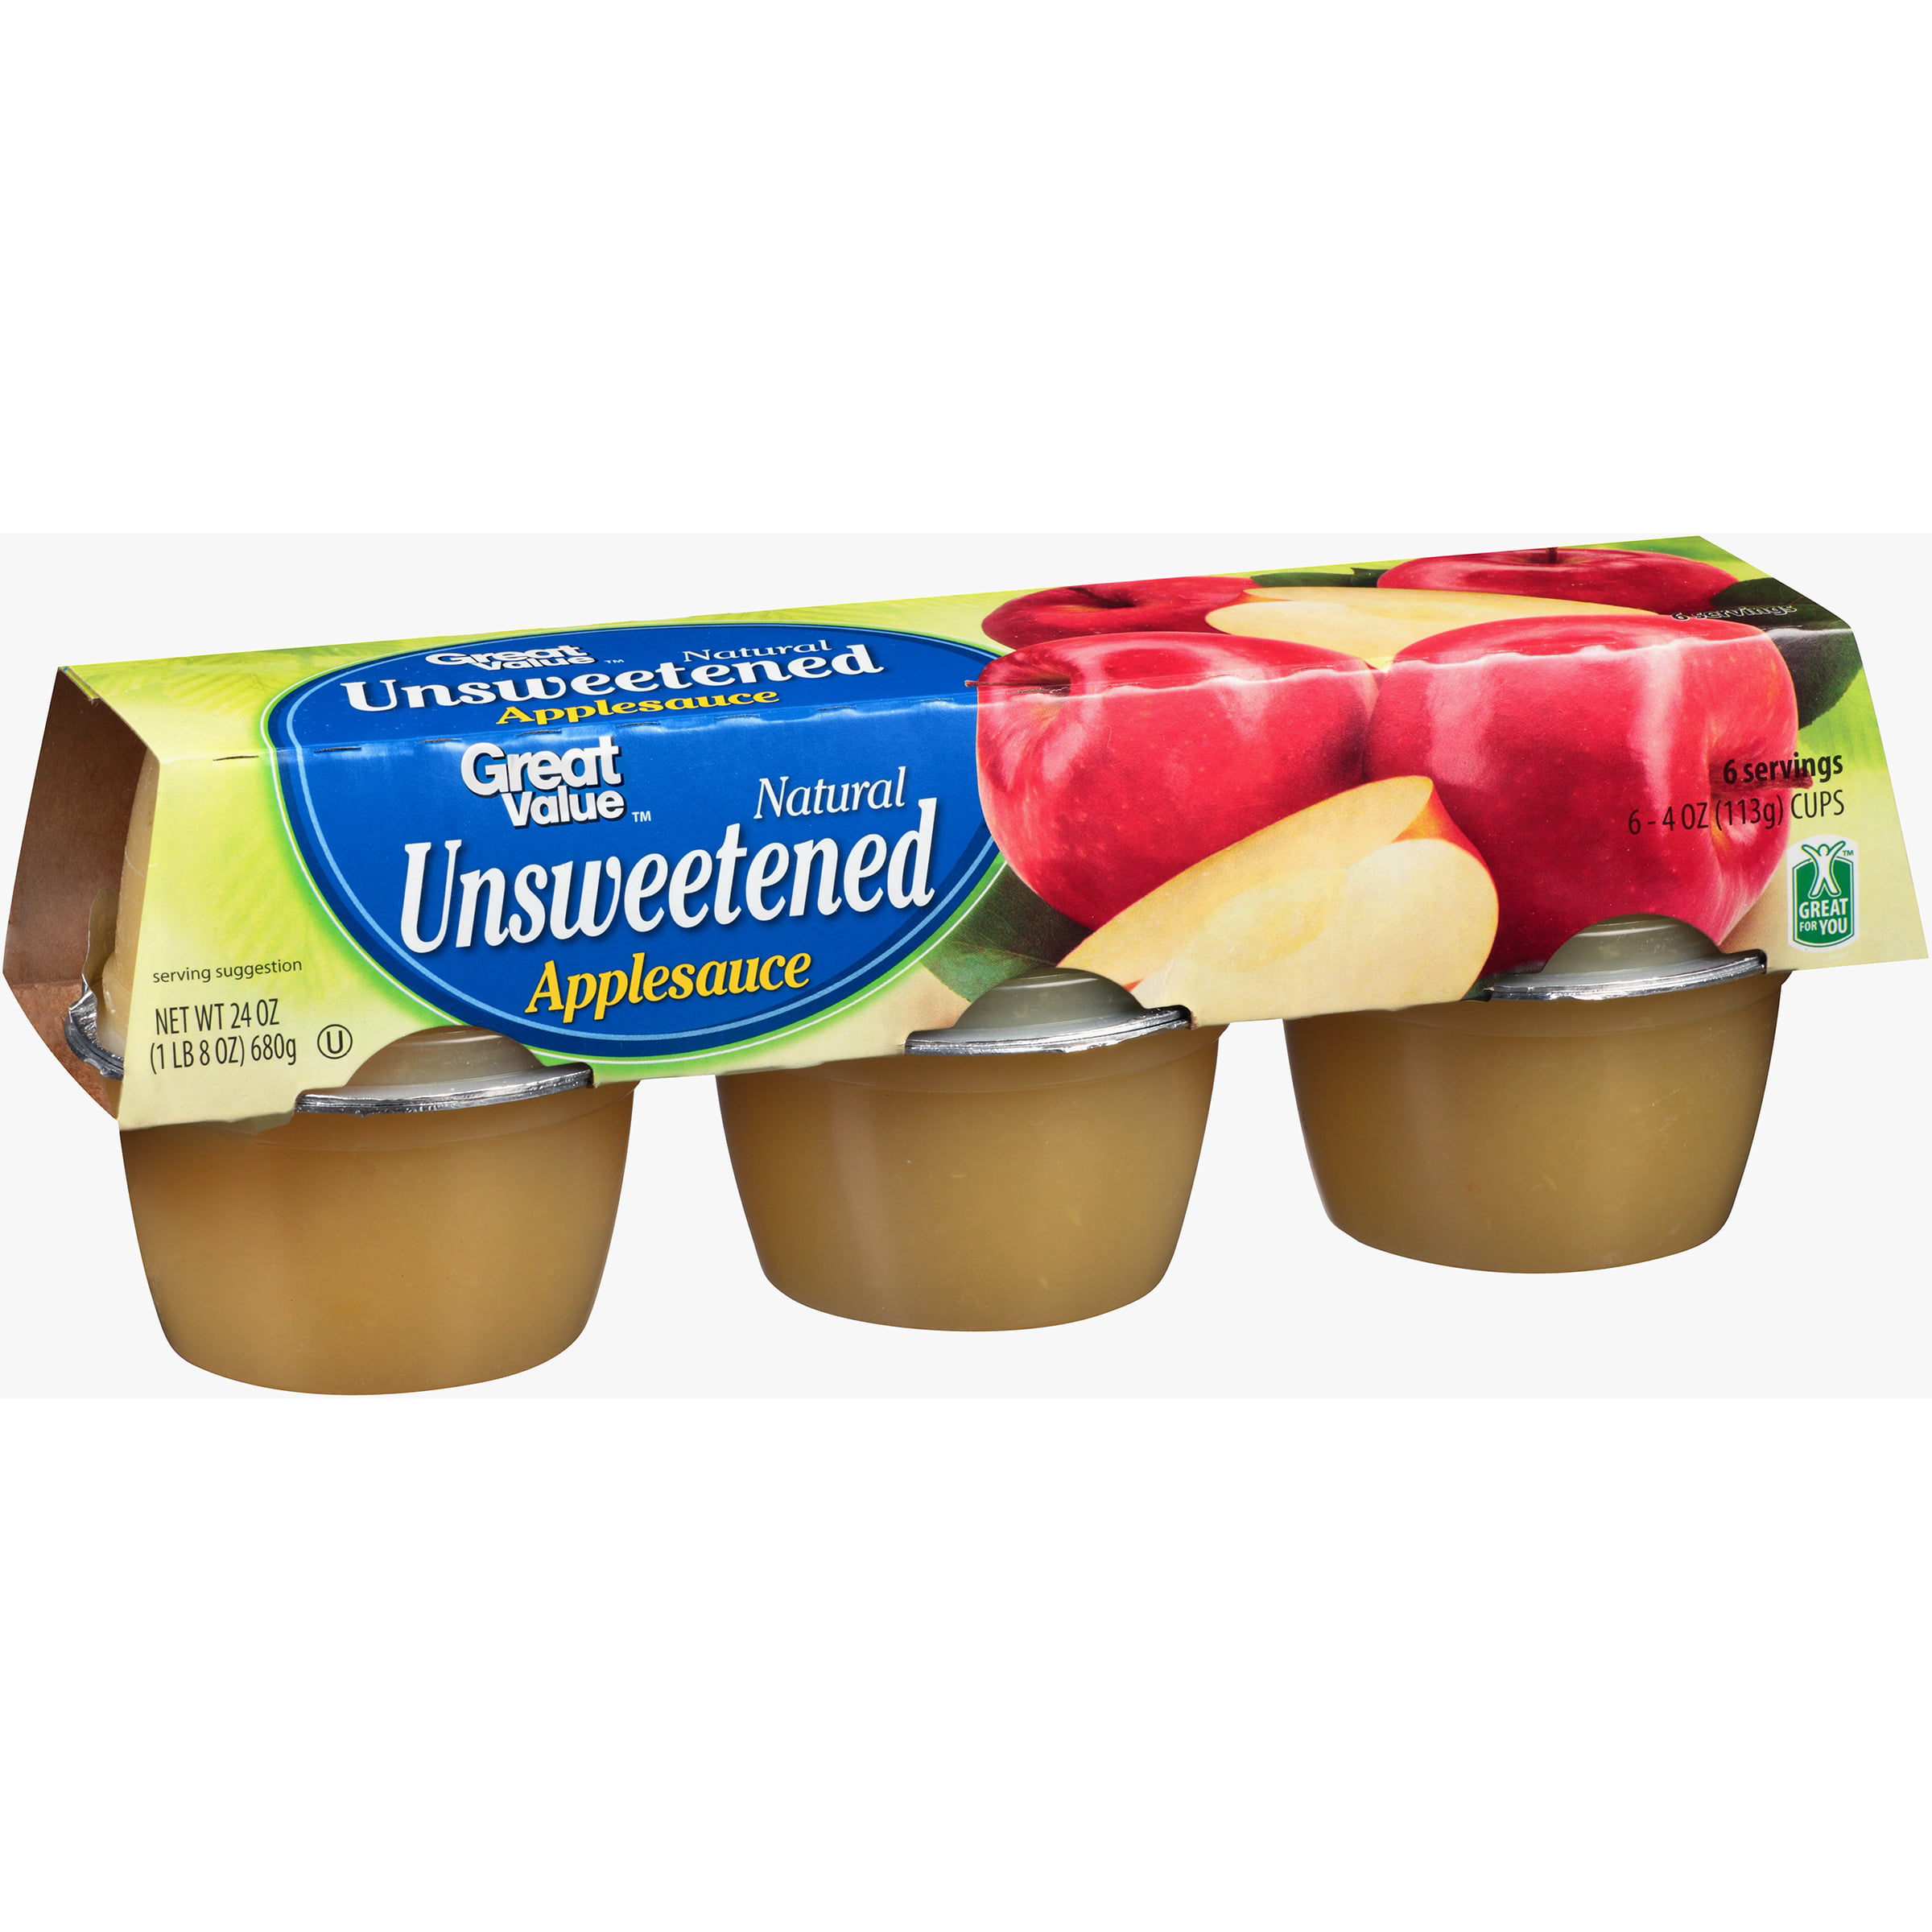 calories in unsweetened applesauce 4 oz cup